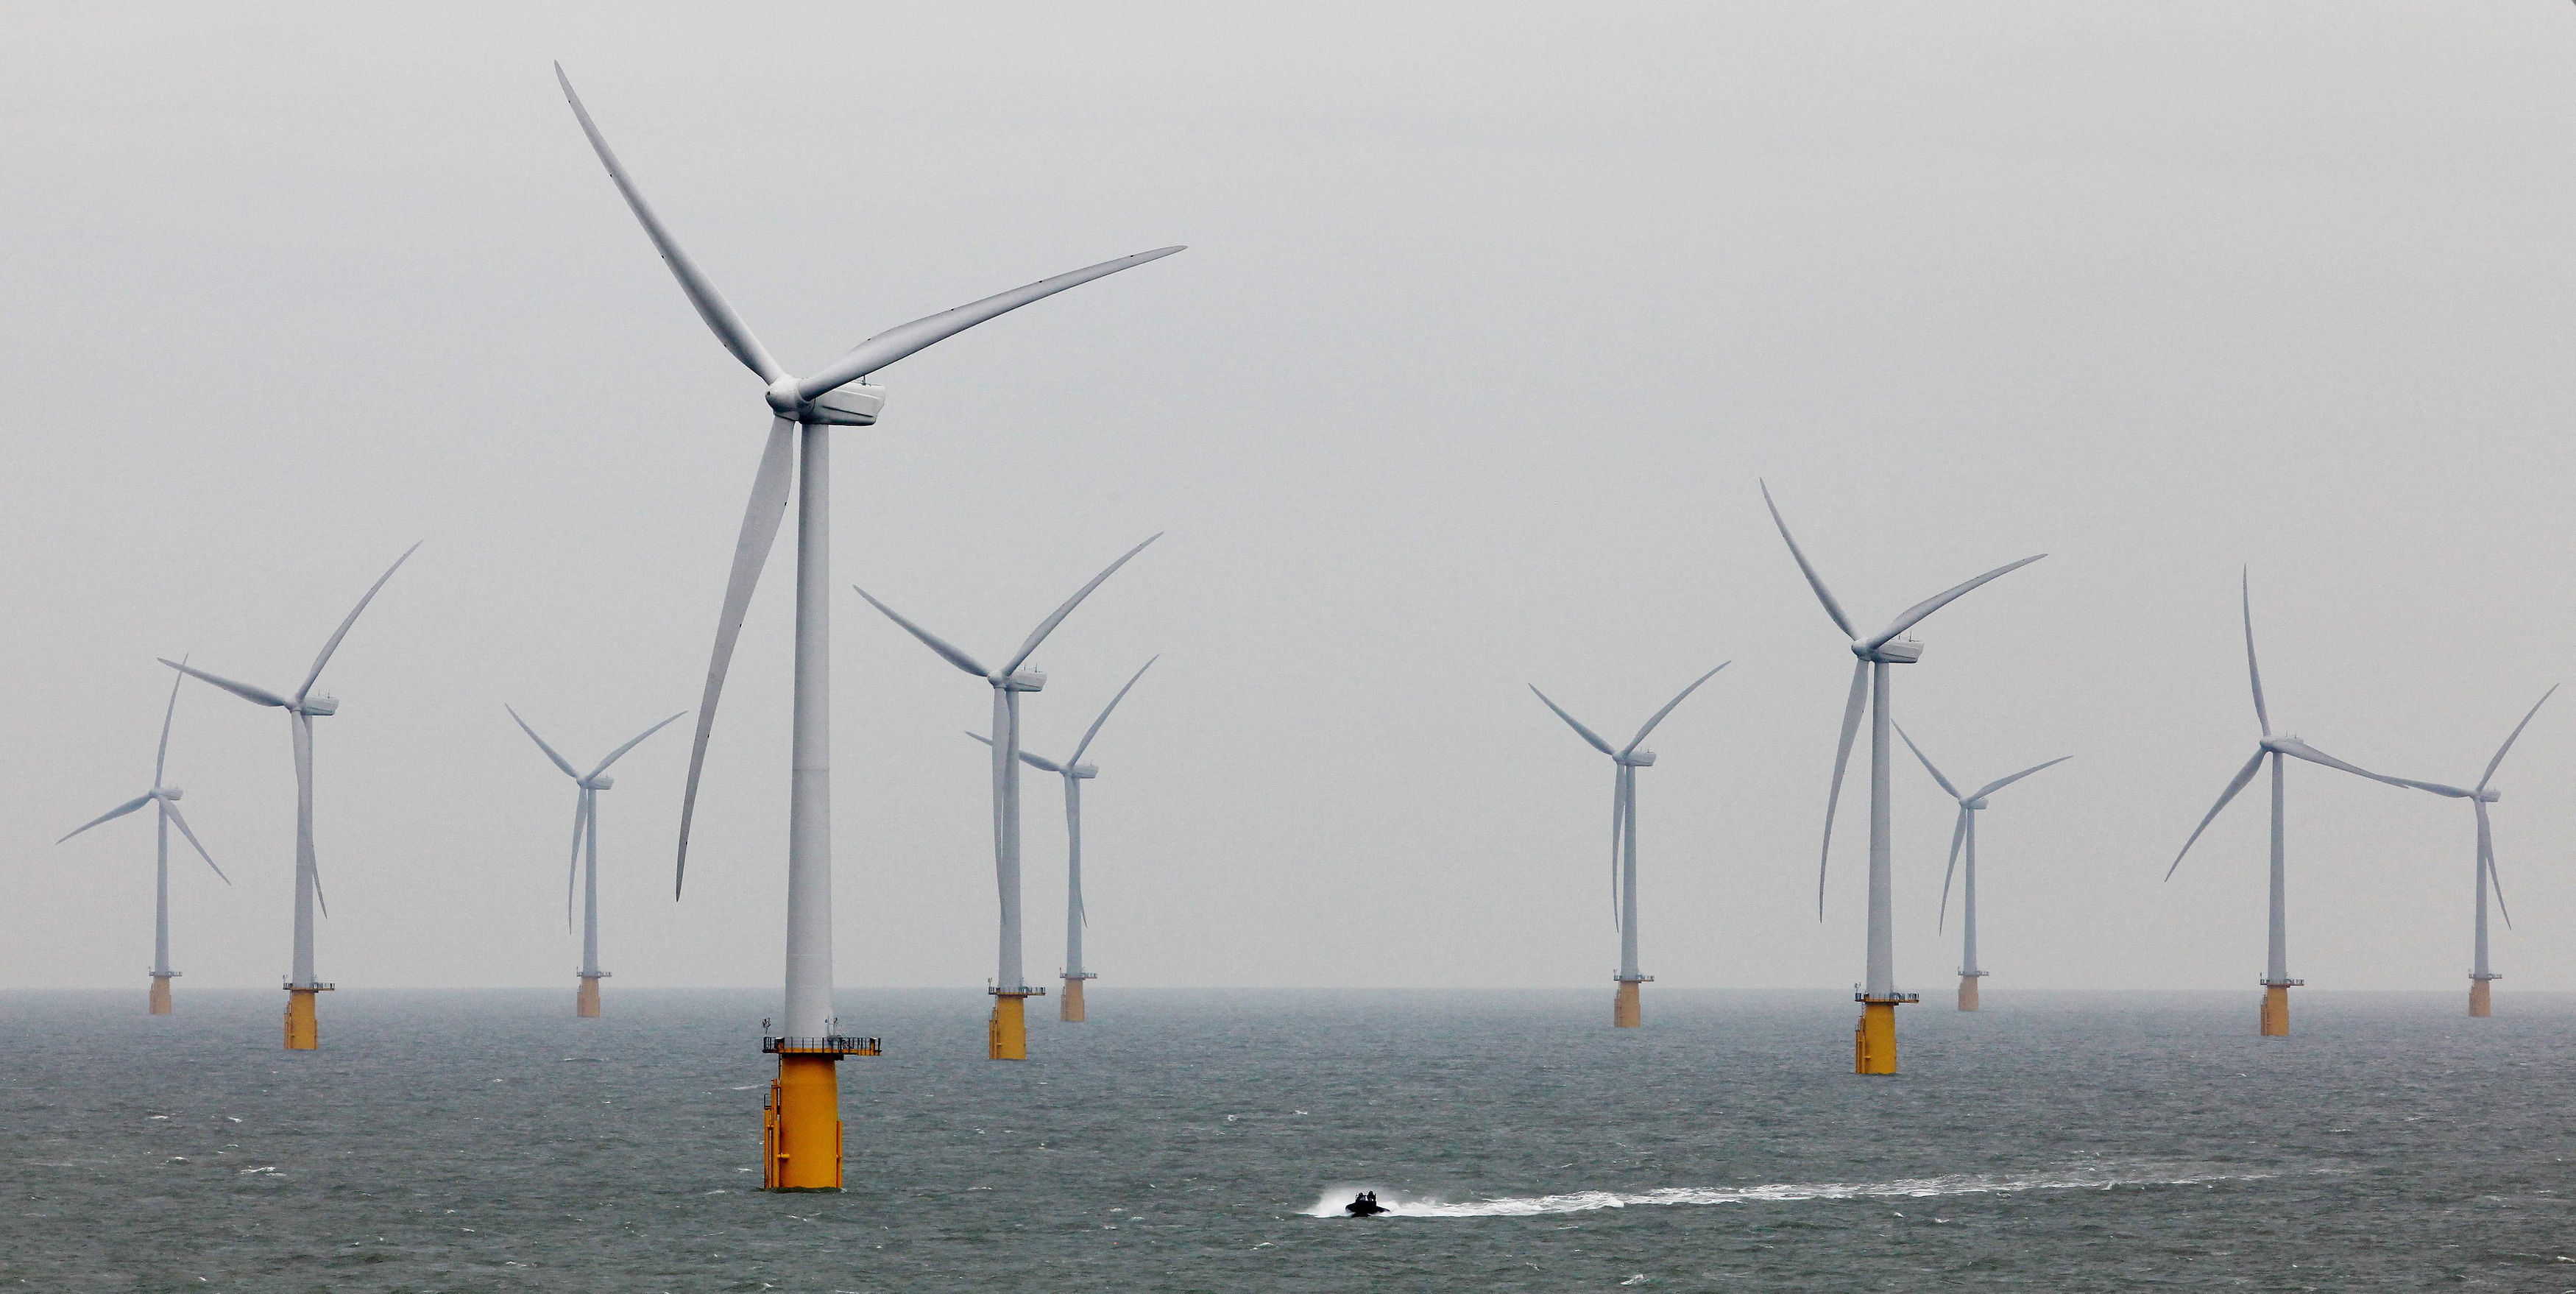 As more renewables come on line, concerns have been raised about how intermittent wind can help meet demand on cold, still winter days, when more electricity is needed. (Gareth Fuller/PA Wire)